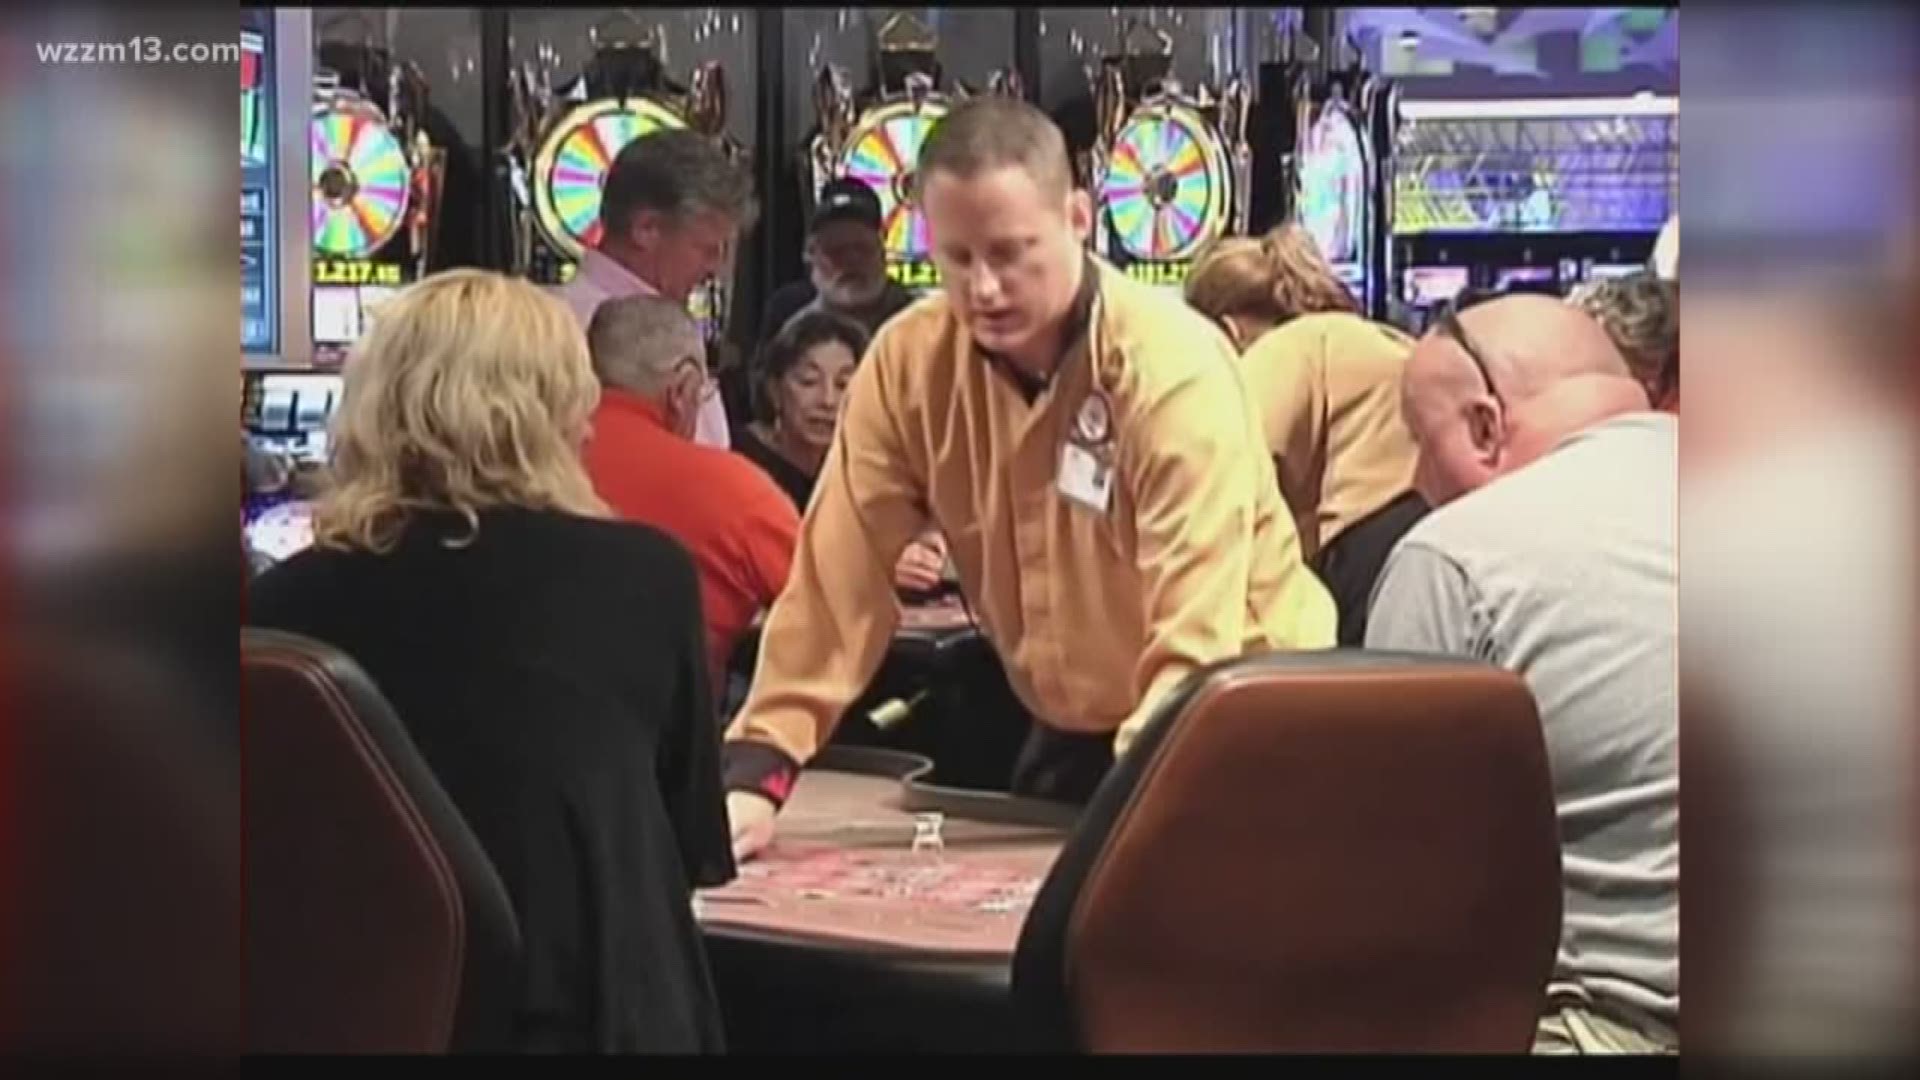 Public comment extended for Muskegon casino